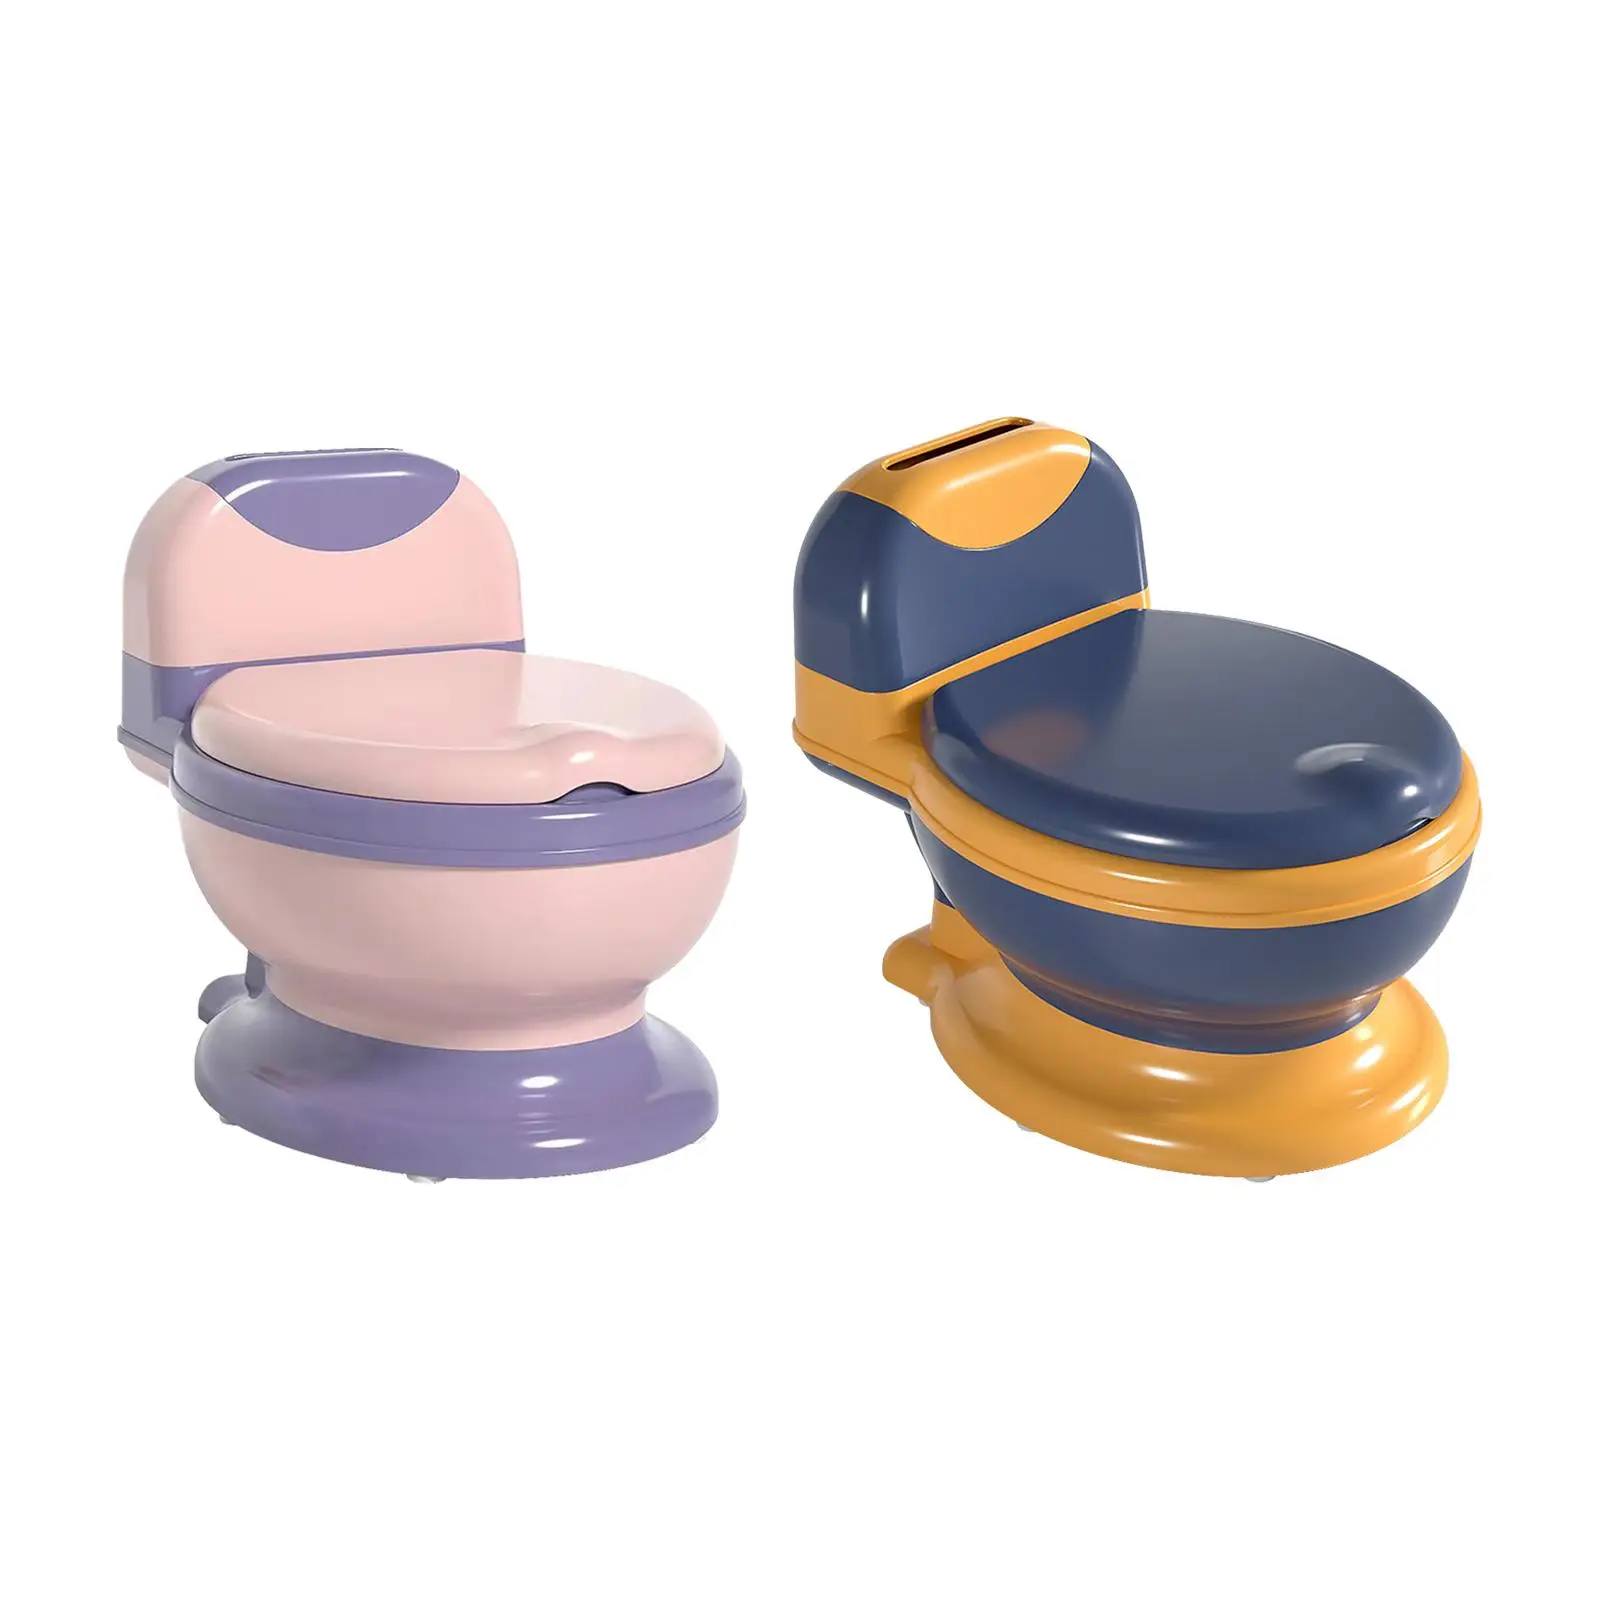 Potty Train Toilet Removable Potty Pot Potty Train Seat Portable Real Feel Potty for Kids Children Baby Girls Toddlers